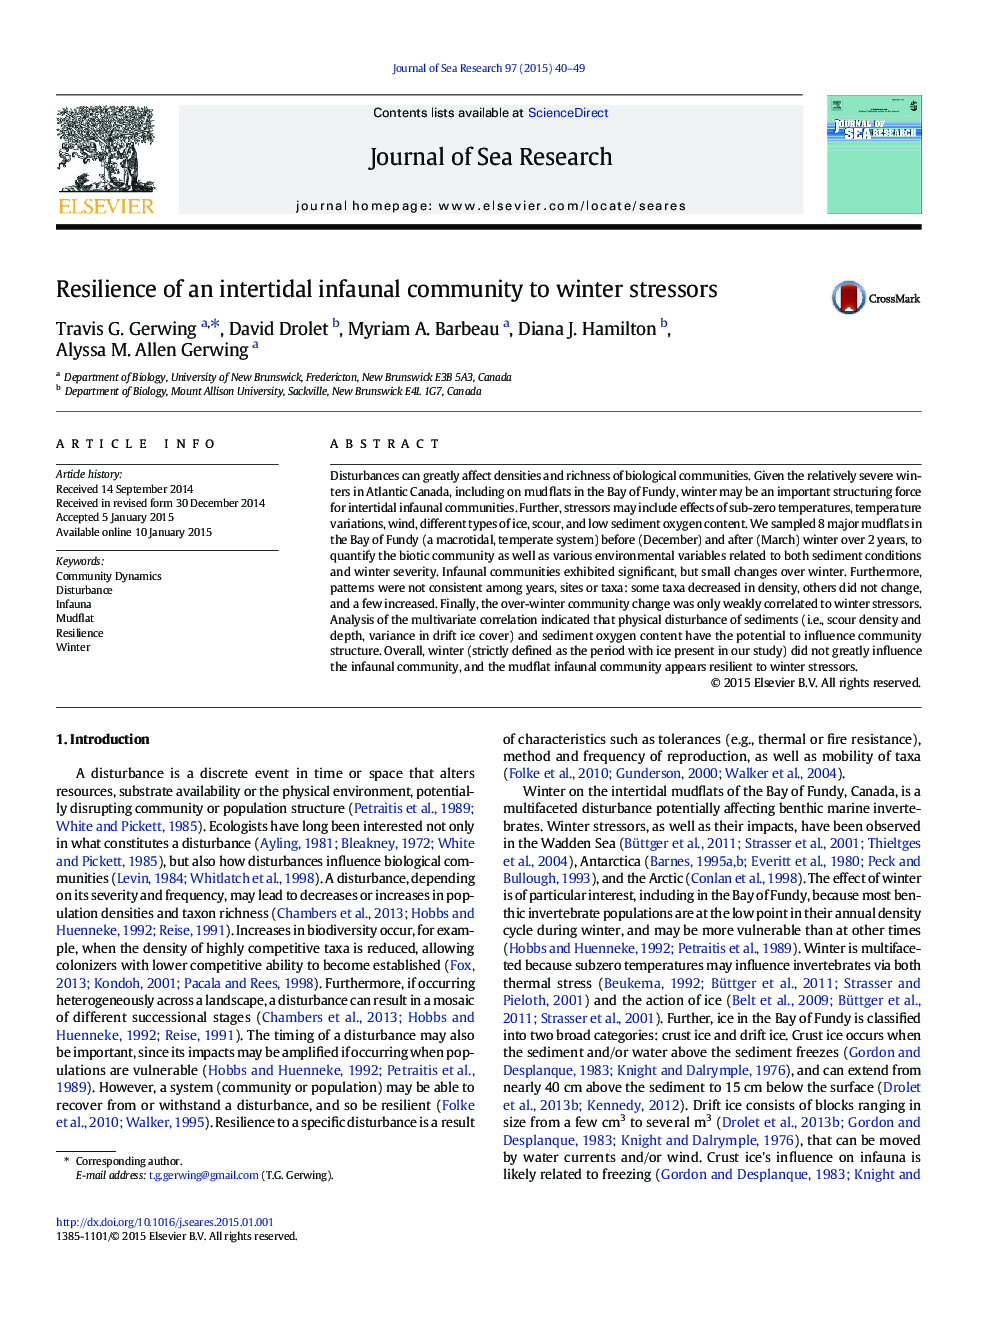 Resilience of an intertidal infaunal community to winter stressors